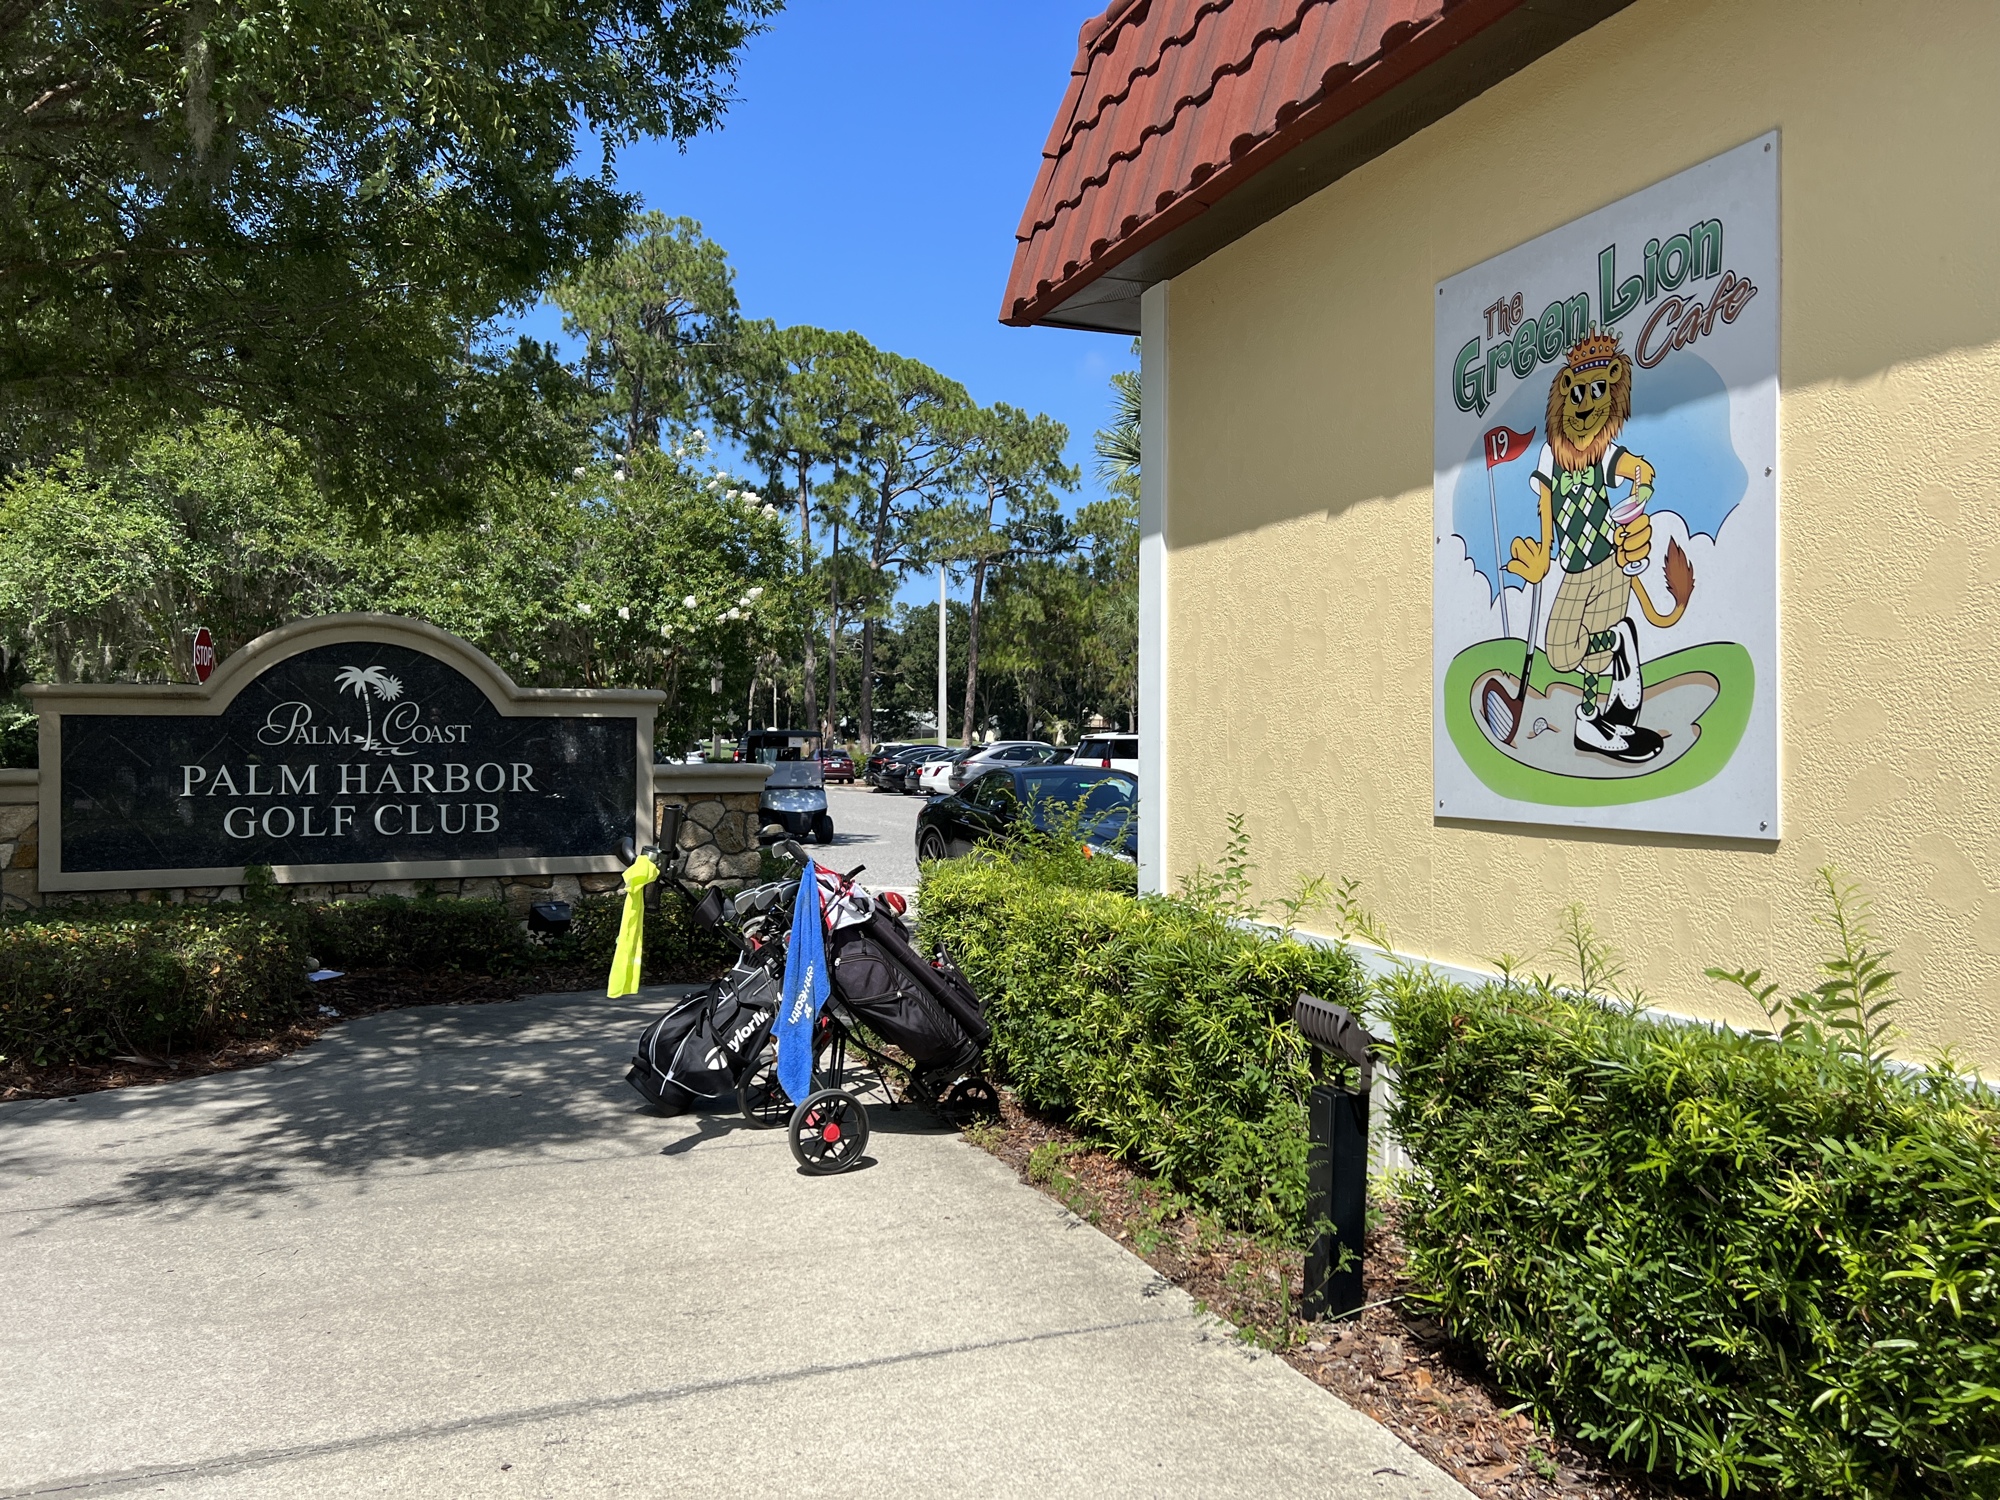 The Green Lion, at the Palm Harbor Golf Club, is an extension of the Golden Lion, in Flagler Beach. Photo by Brian McMillan